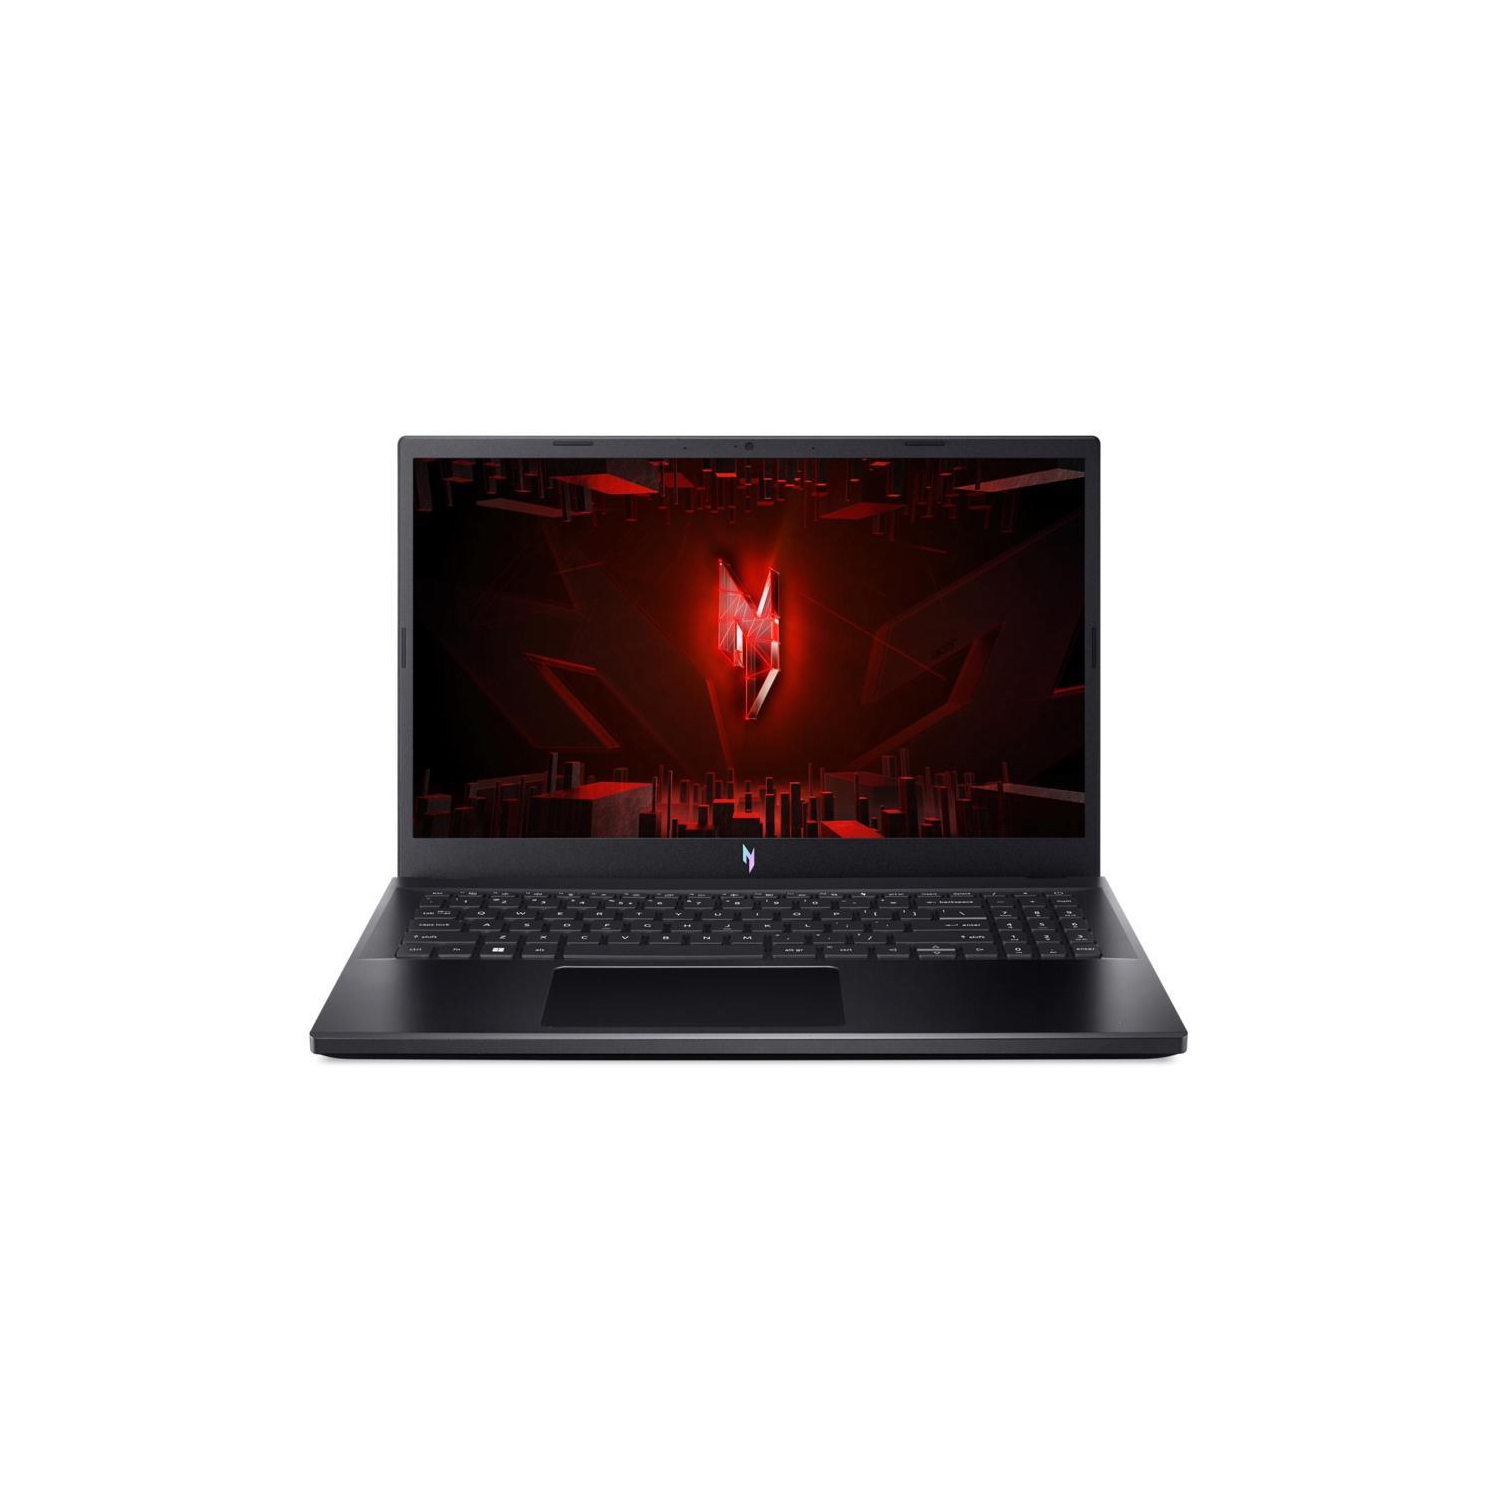 Acer Nitro 5 15.6” LED FHD 144hz IPS Gaming Laptop - Intel Core i5-13420H - Nvidia Geforce RTX 2050 - 32GB DDR5 Memory -512GB SSD - Backlit Keyboard - WiFi6, DTS:X Audio